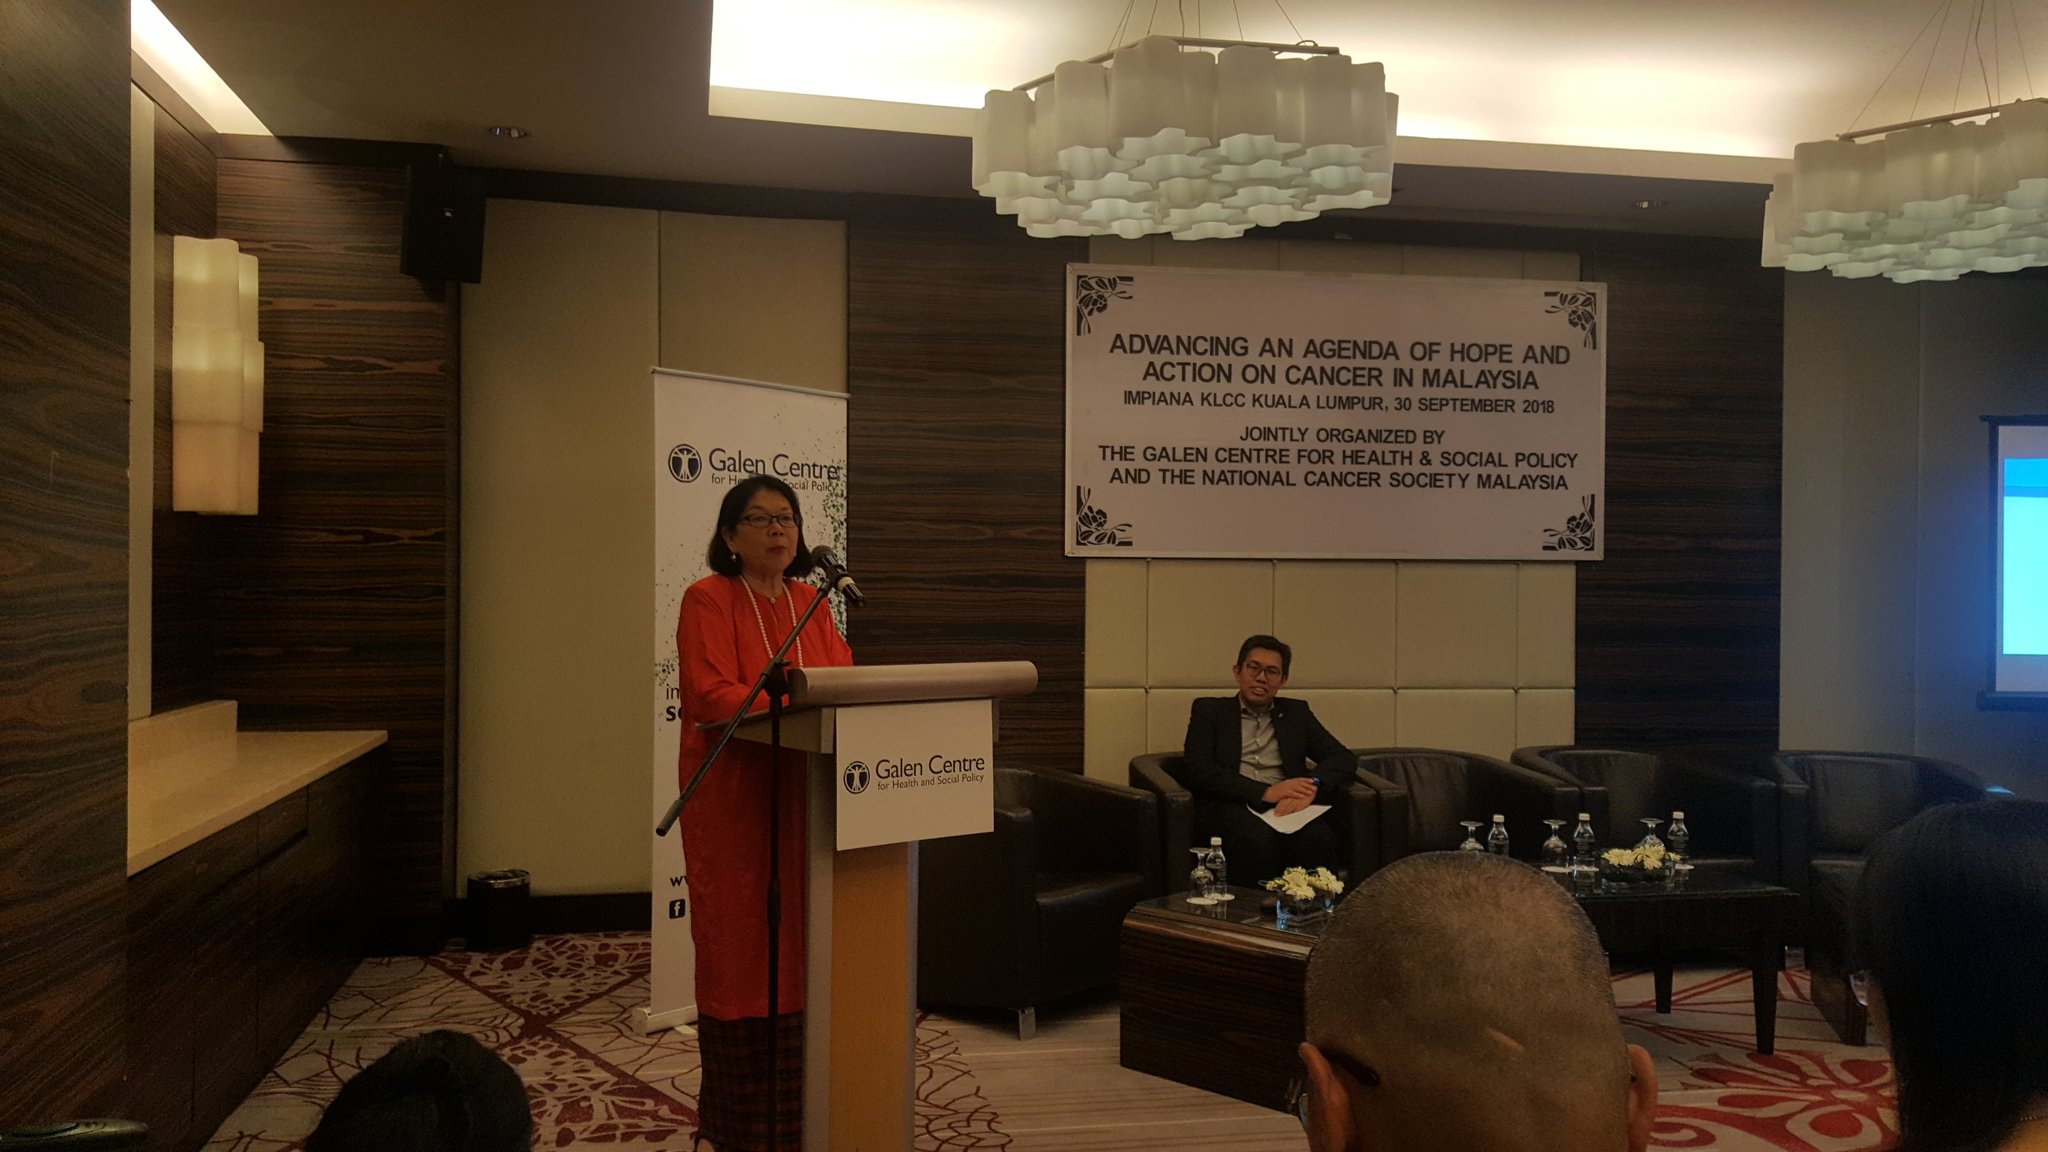 Maria Chin Abdullah On Twitter The Galen Centre The National Cancer Society Today Launched The Cancer Care Working Group Cancer Policy Recommendation 4 Policymakers The Forum Today Stressed The Importance